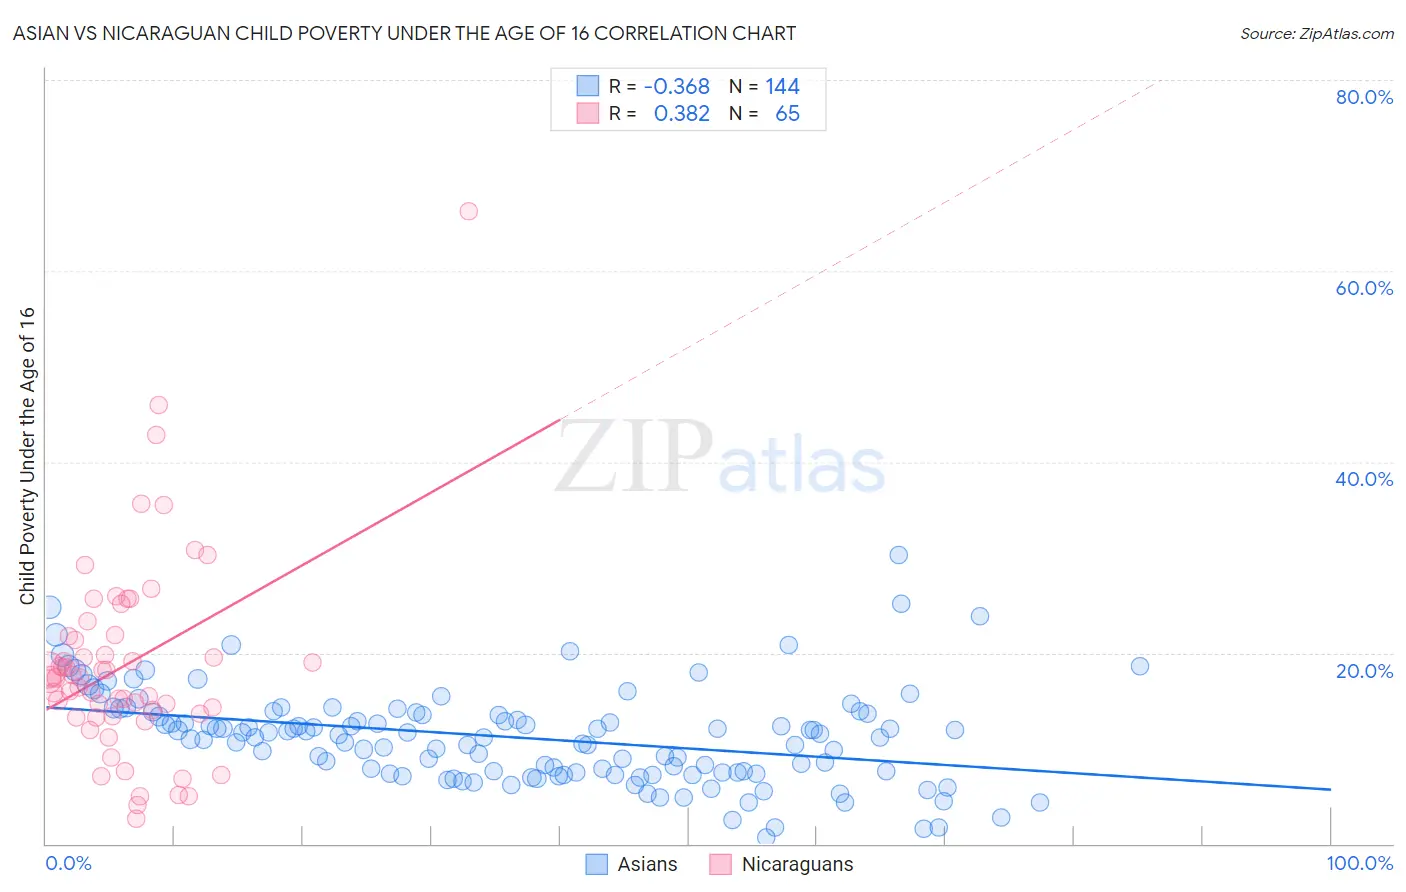 Asian vs Nicaraguan Child Poverty Under the Age of 16